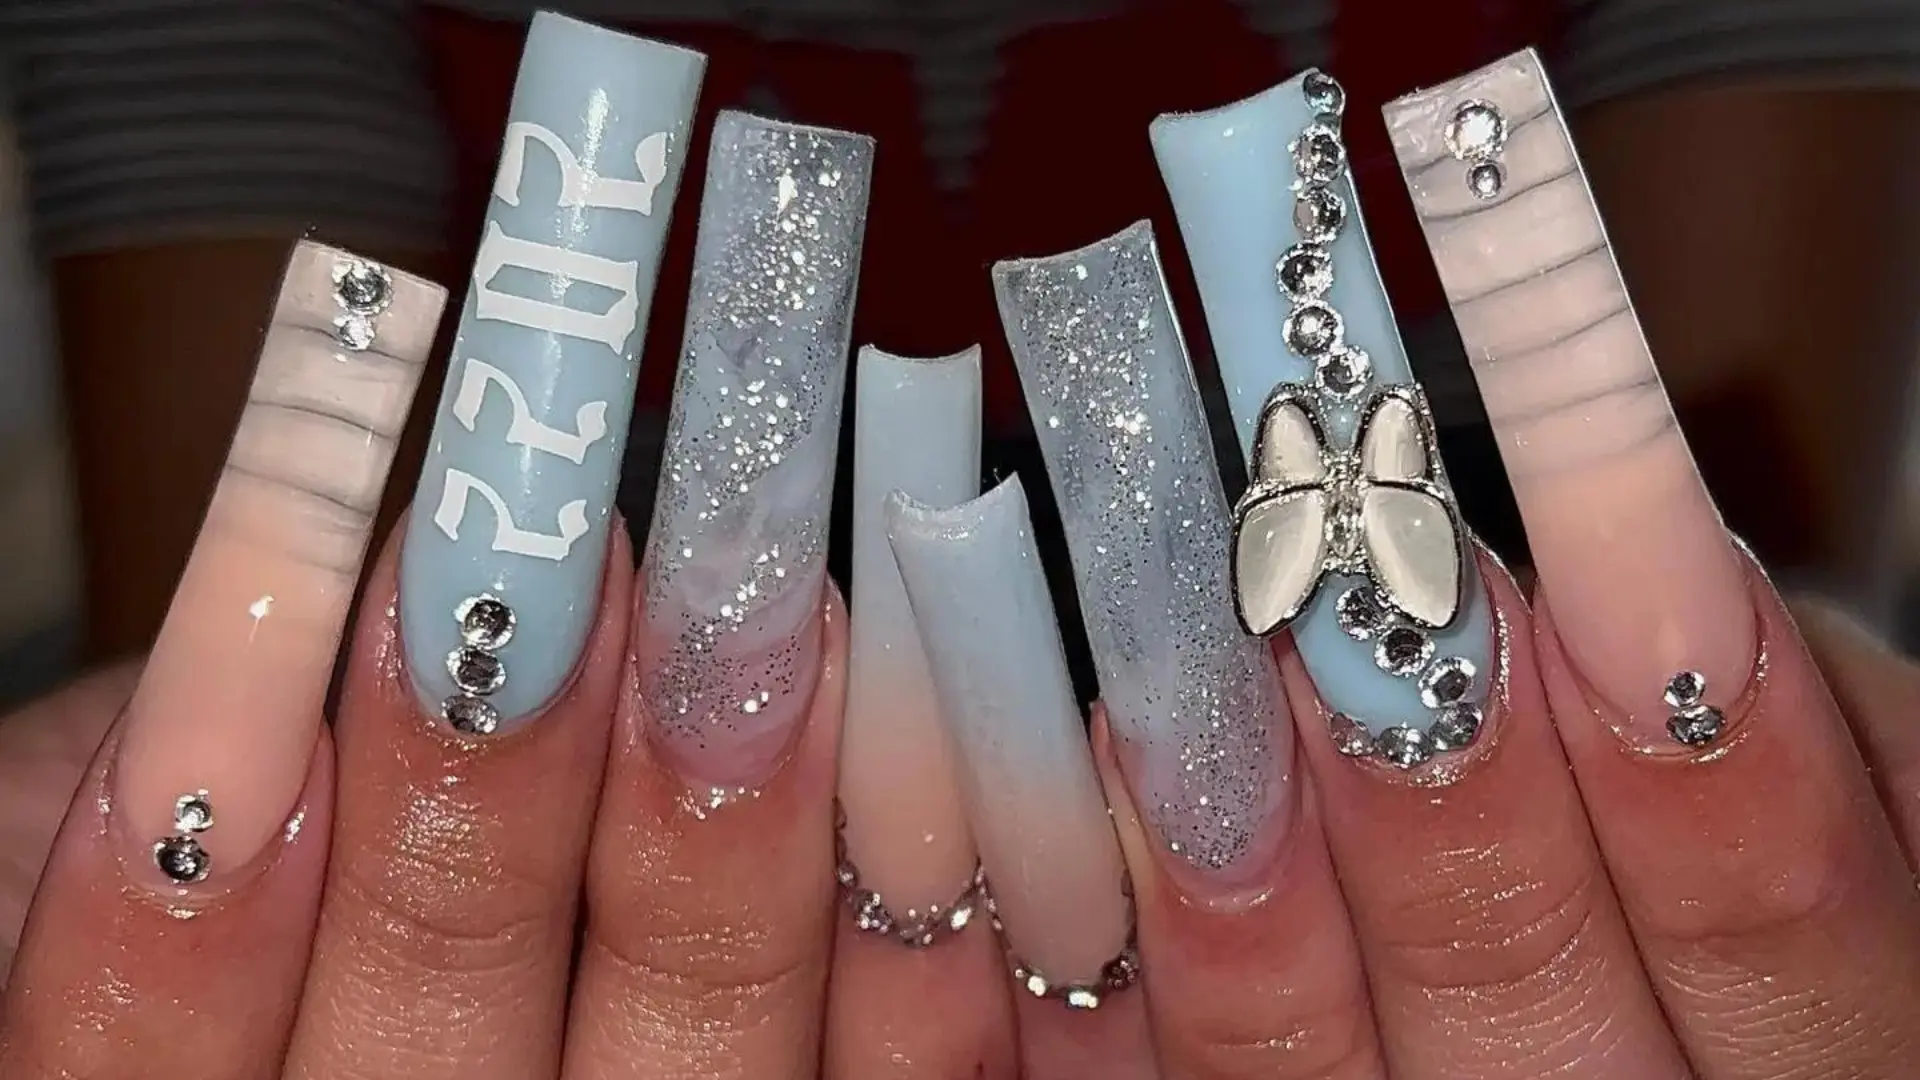 1. Graduation themed nail designs - wide 2